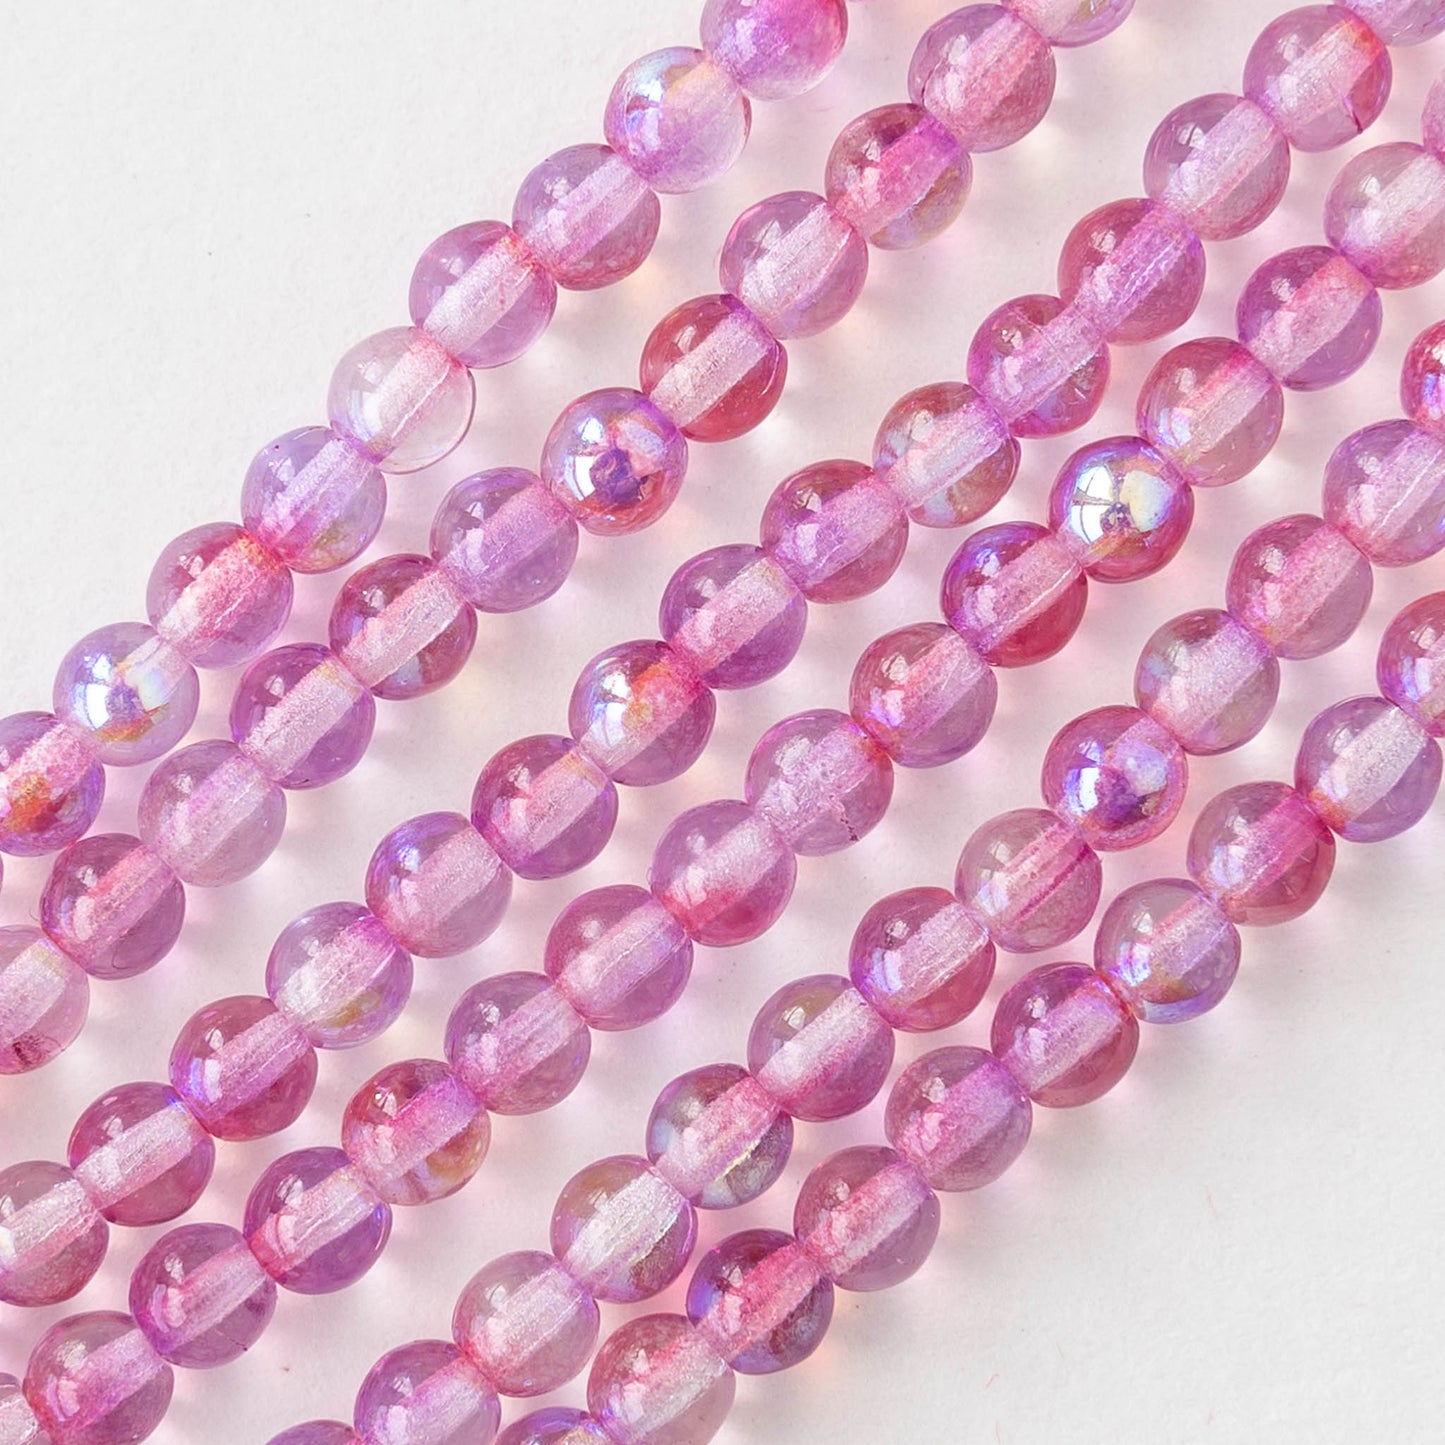 Tibaoffy Size 6/0 Crafts Glass Seed Beads 4mm Pink Beads for Jewelry Making  (Total About 100g About 1200pcs)